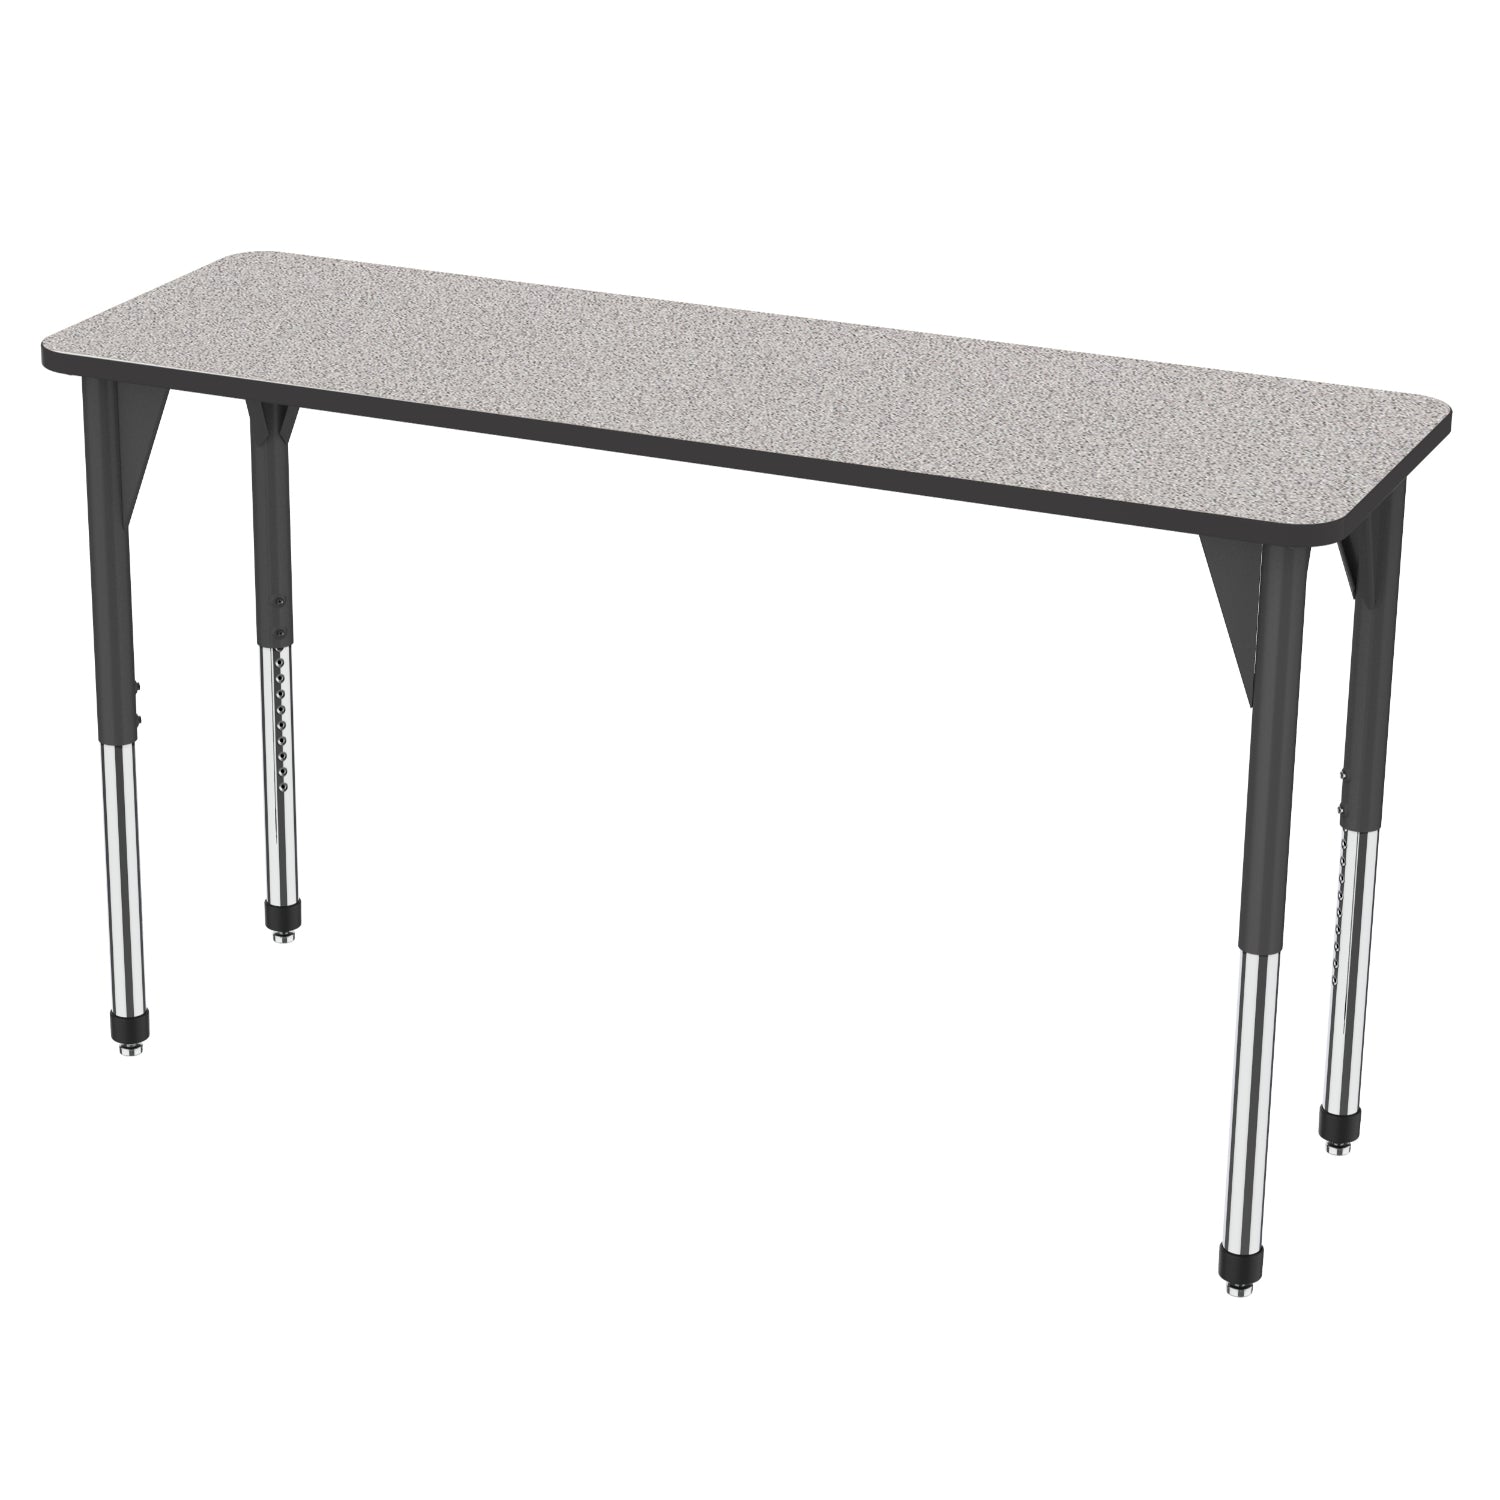 Premier Standing Height Collaborative Classroom Table, 24" x 72" Rectangle